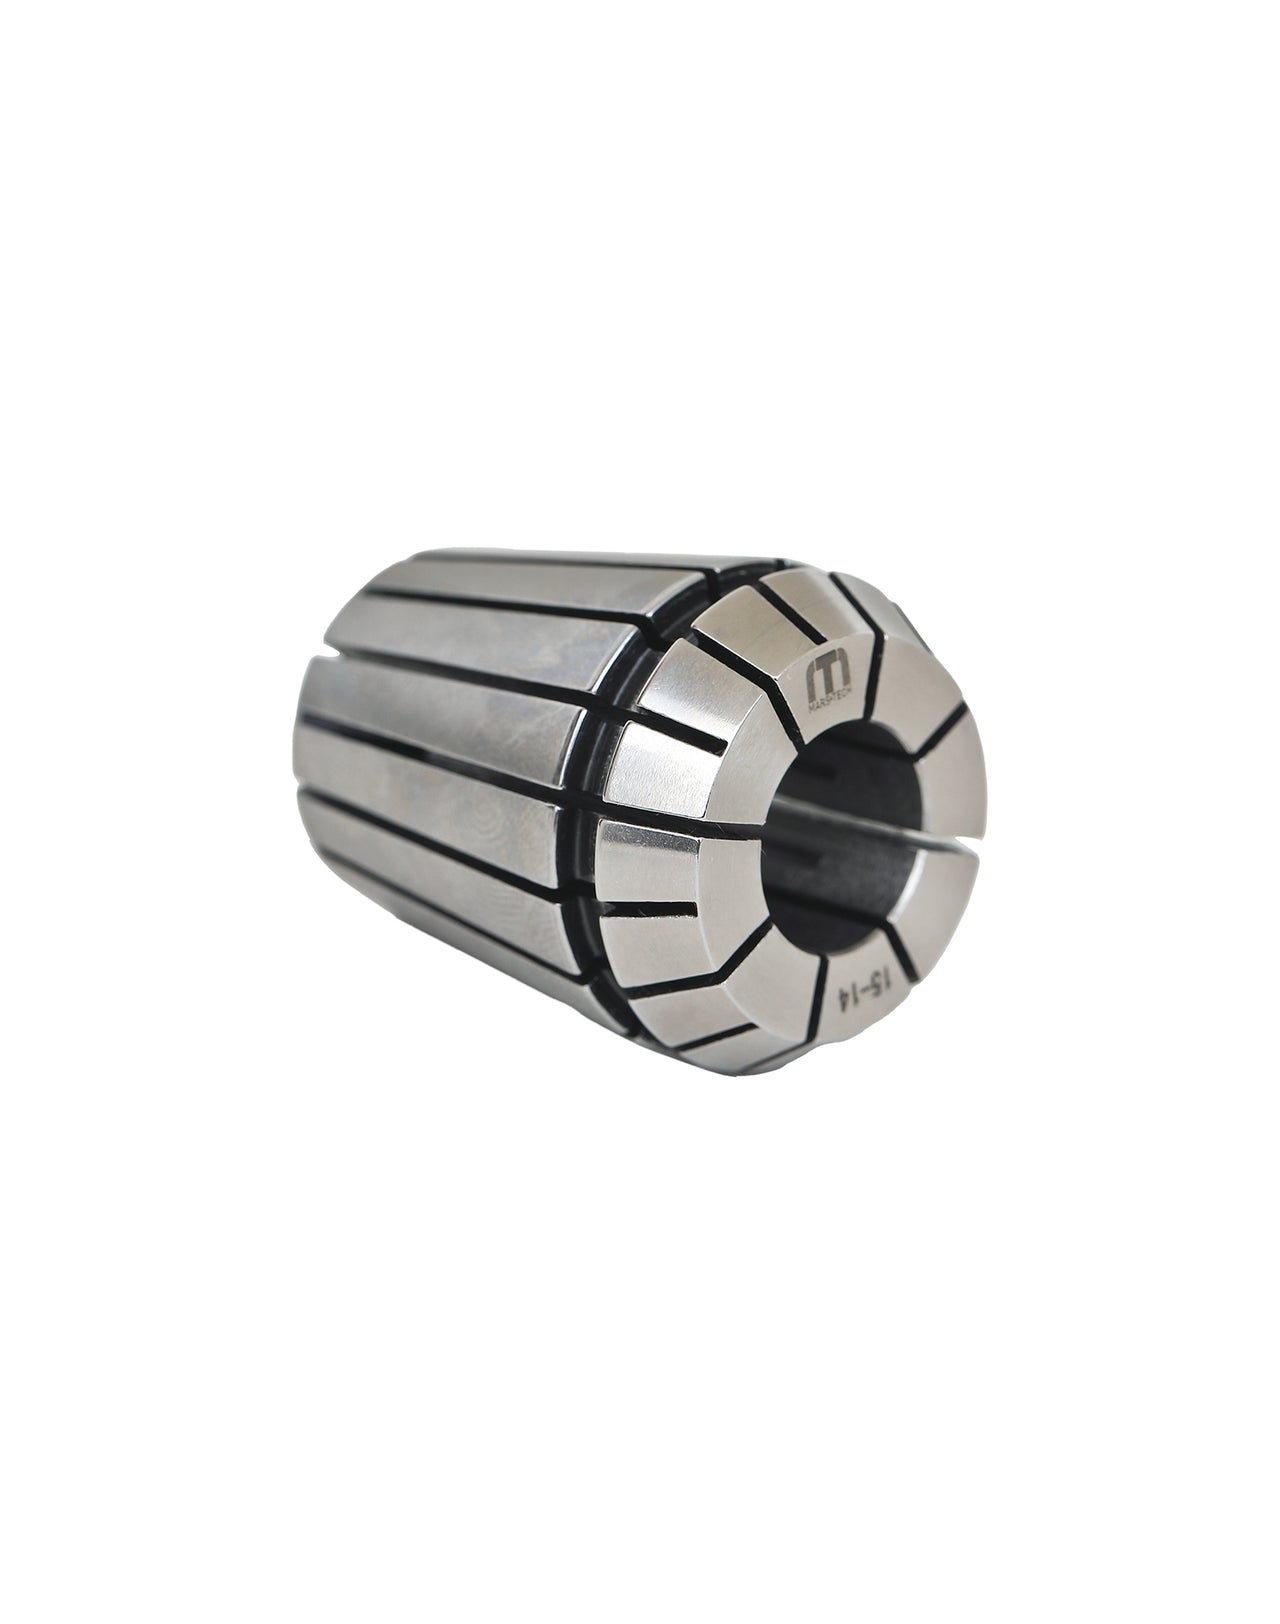 ER16 Collet Ultra high precision 0.005 AAA quality